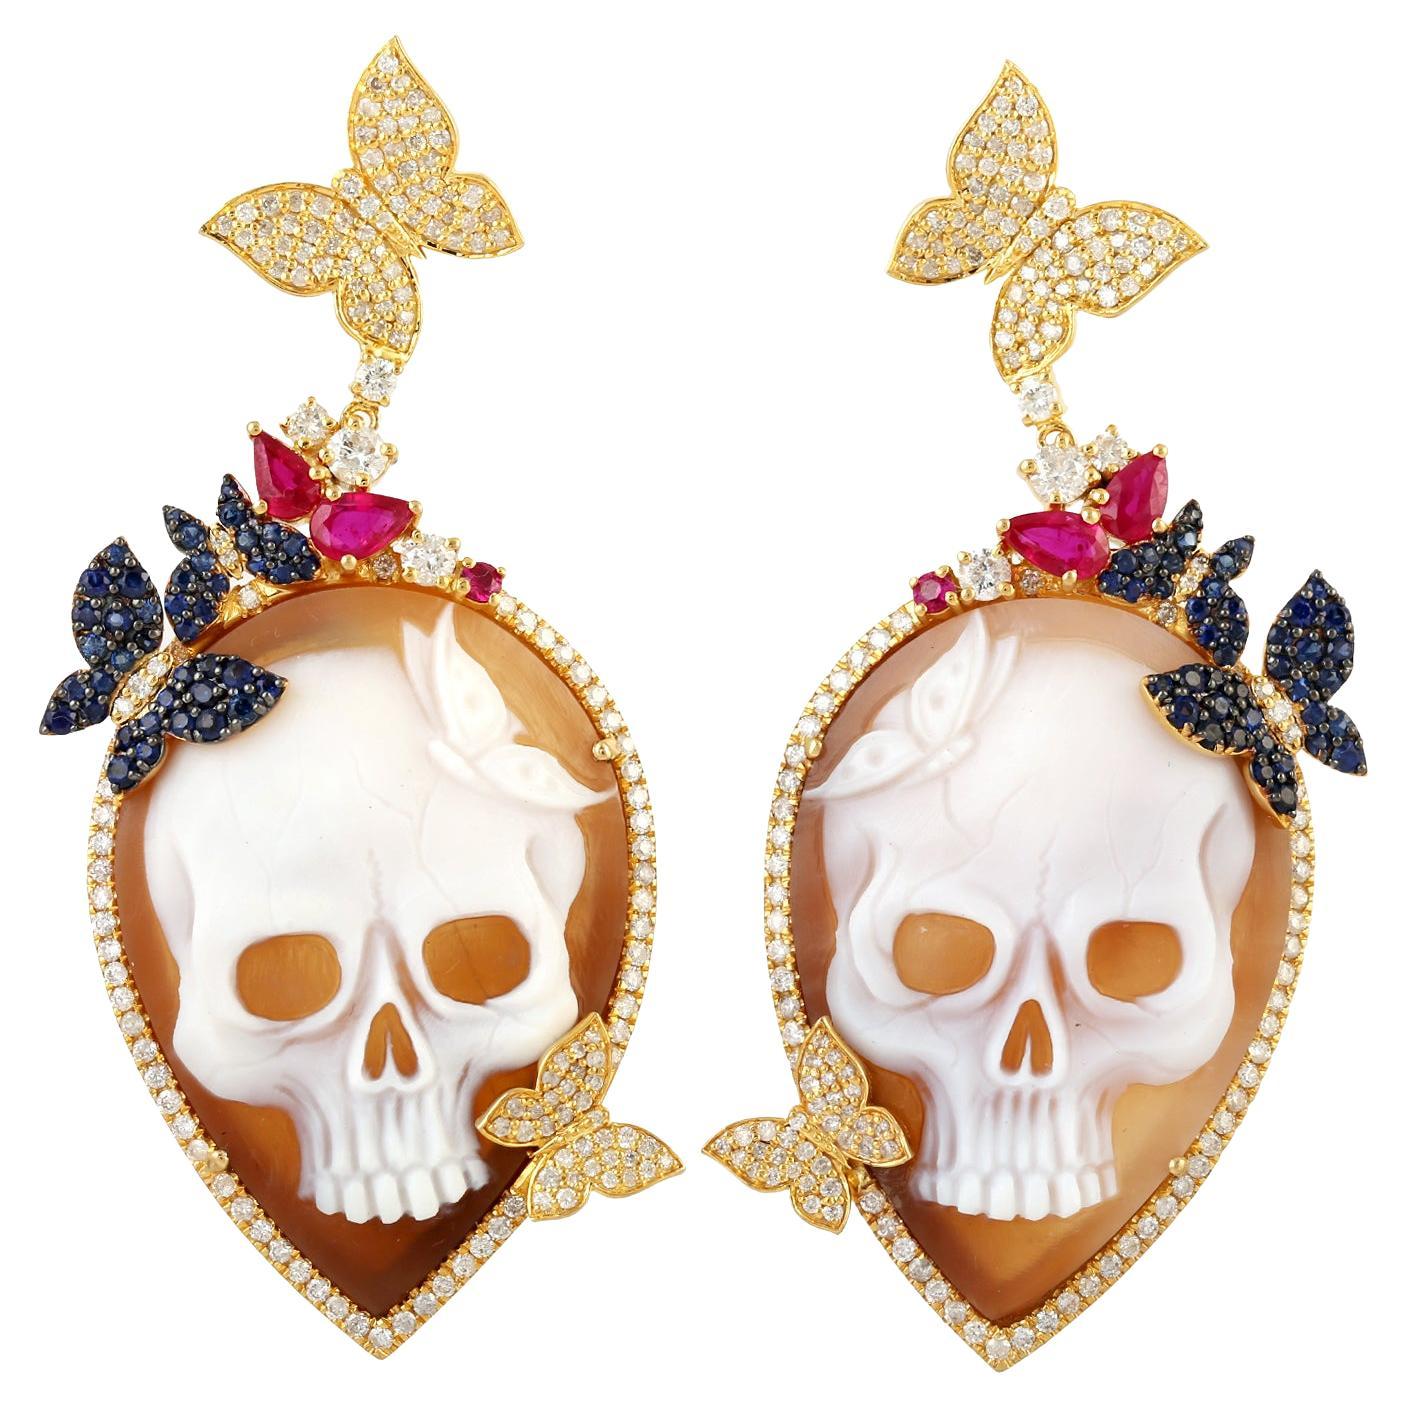 Shell Cameo Skull Carving & Butterfly Earrings With Sapphire, Diamonds & Ruby